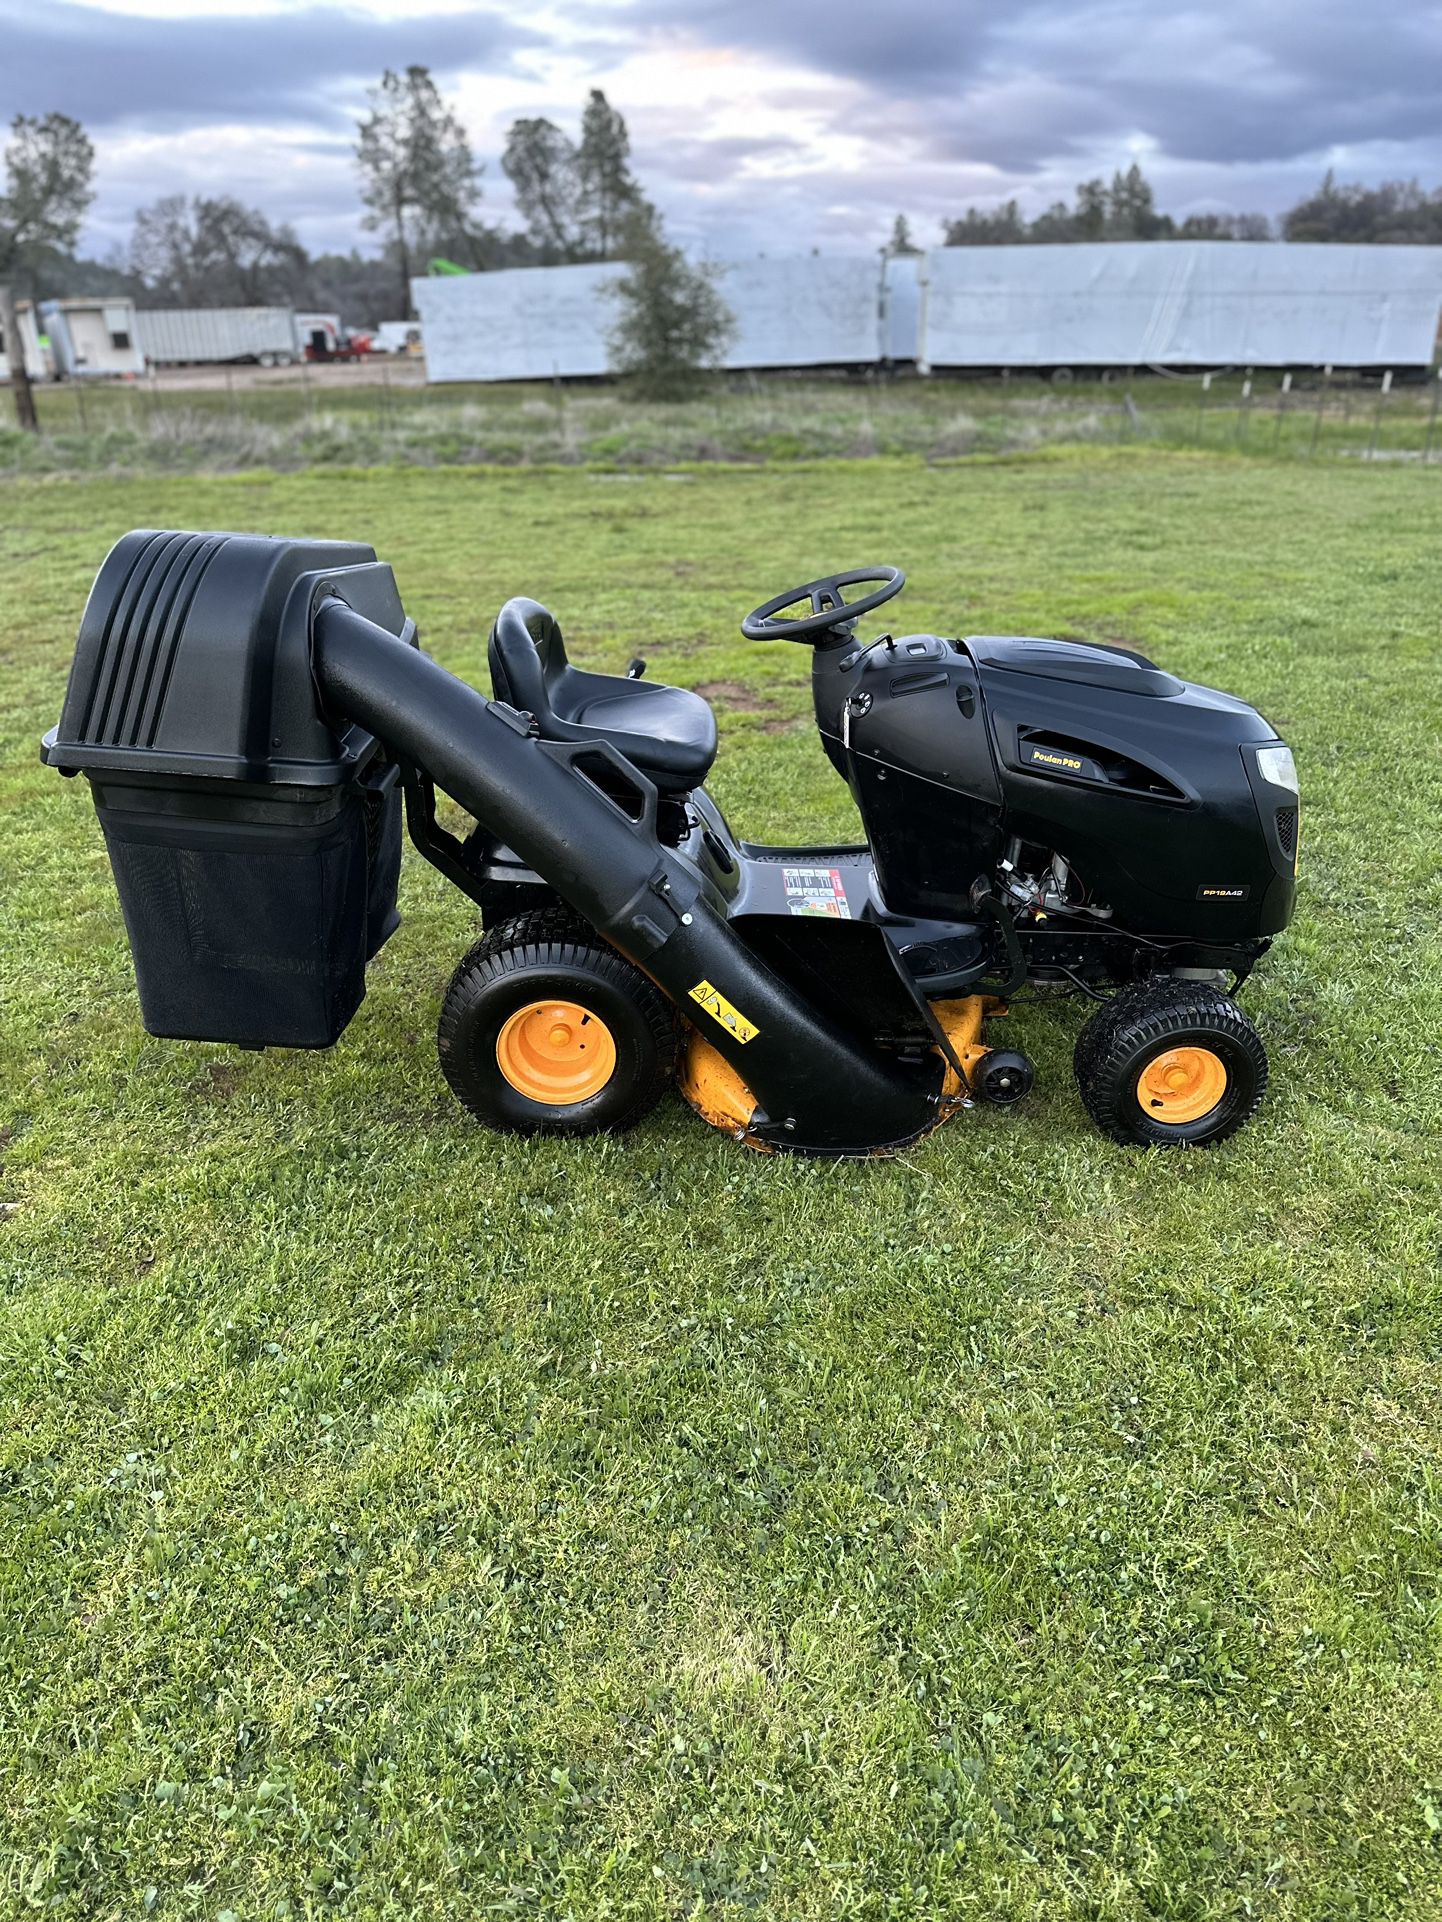 Poulan Pro Riding Mower With Bagger